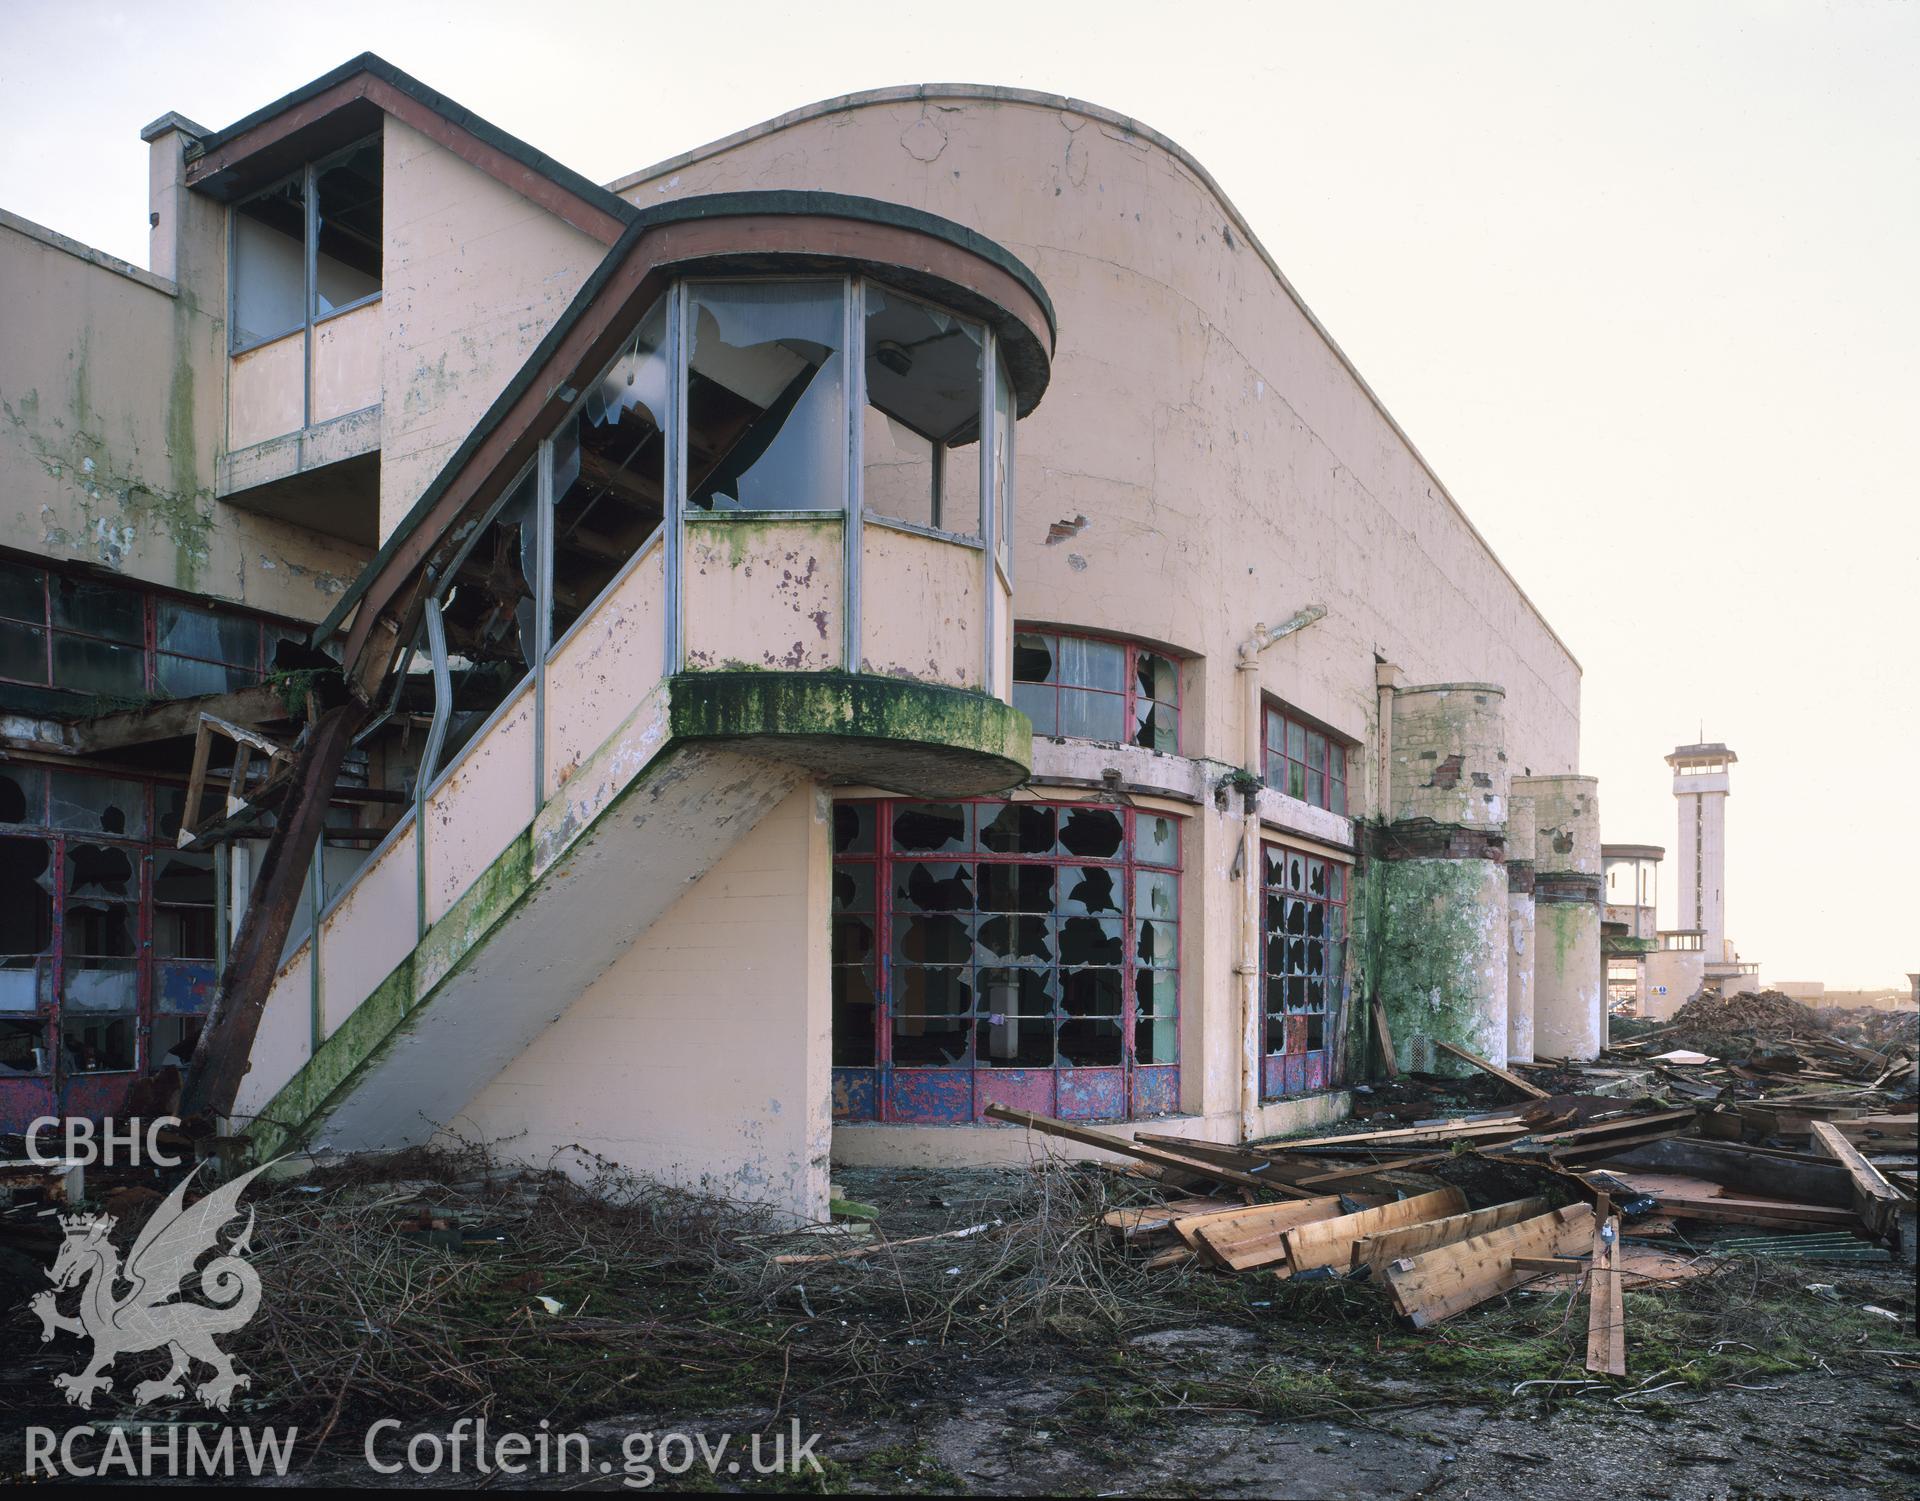 RCAHMW colour transparency showing general view of Pontins Holiday Camp, Prestatyn.